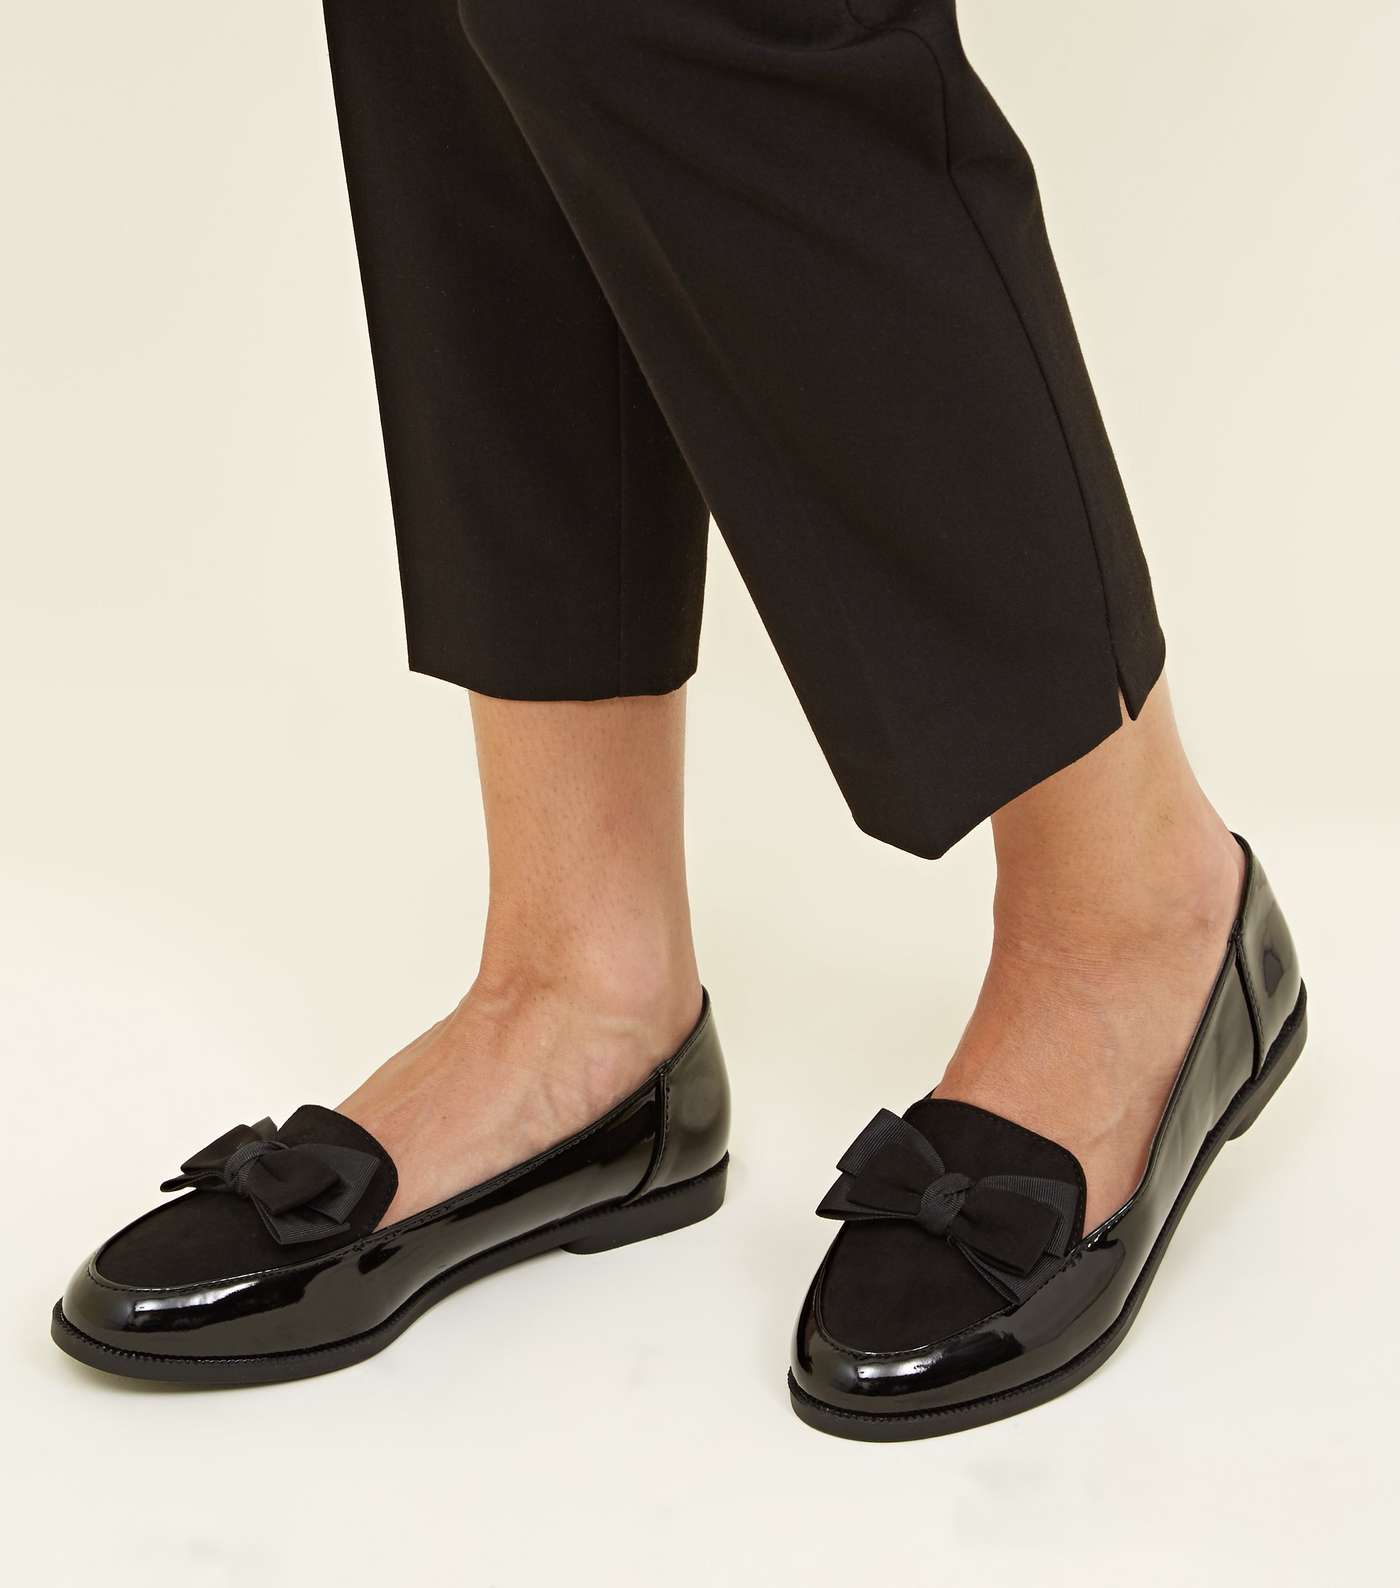 Black Patent and Suedette Bow Front Loafers Image 2